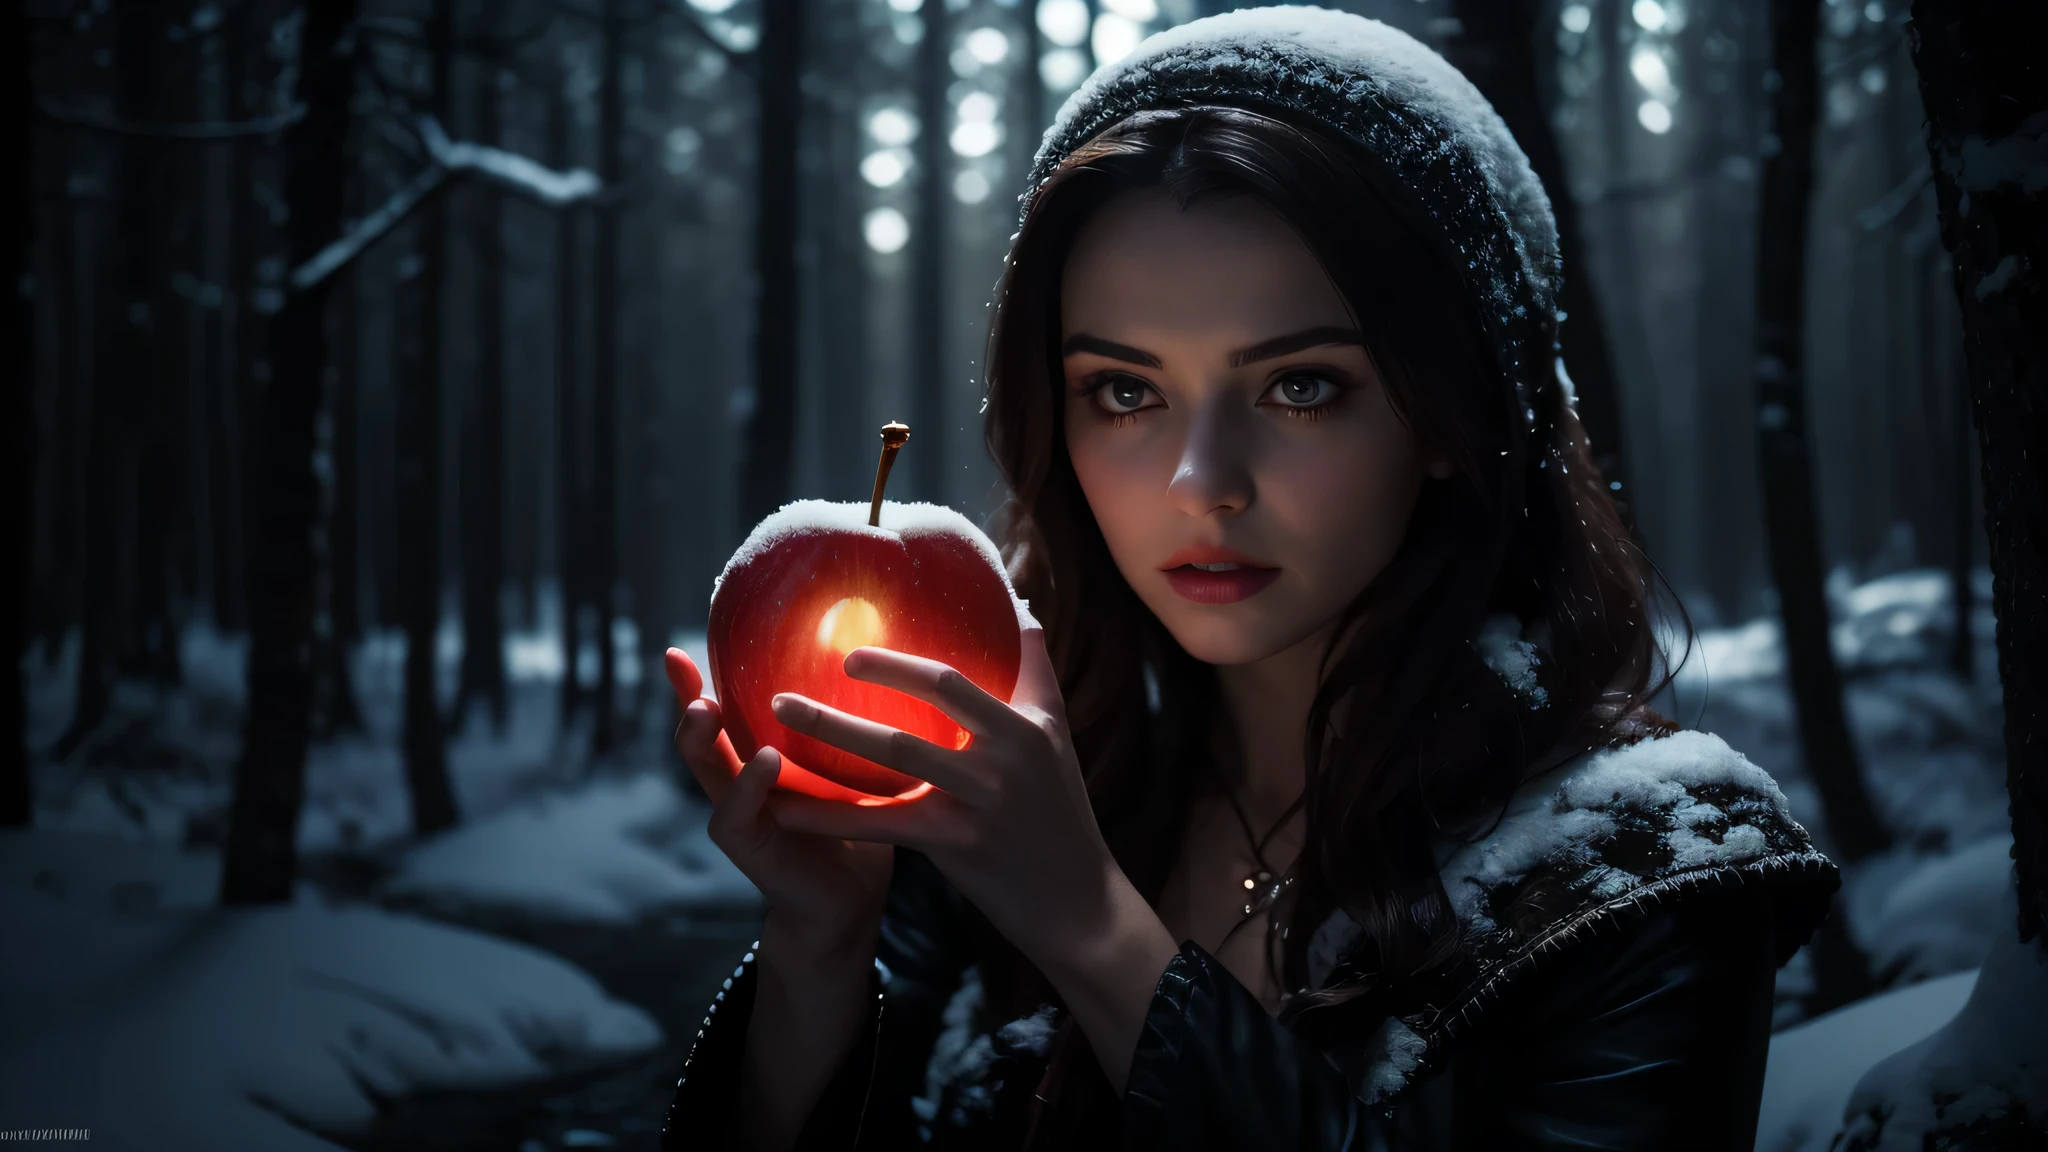 Snow White stood in the middle of a dark forest, shrouded in darkness and drama. Her dress reflected the glow of the glowing apple she held in her hand. Her face was pale than snow, and her eyes shone mysteriously in the dark surroundings, her extremly long redhair are blowing in the wind. The harsh light of the poisoned apple shone into Snow White's hands, creating a contrast with the darkness of the forest surrounding her. Her lips were slightly ajar, showing the sadness and drama of the fate she had been dealt., high detail, Gothic art, Realism, cinematic lighting, depth of field, glowing light, best quality, highres, UHD, masterpiece